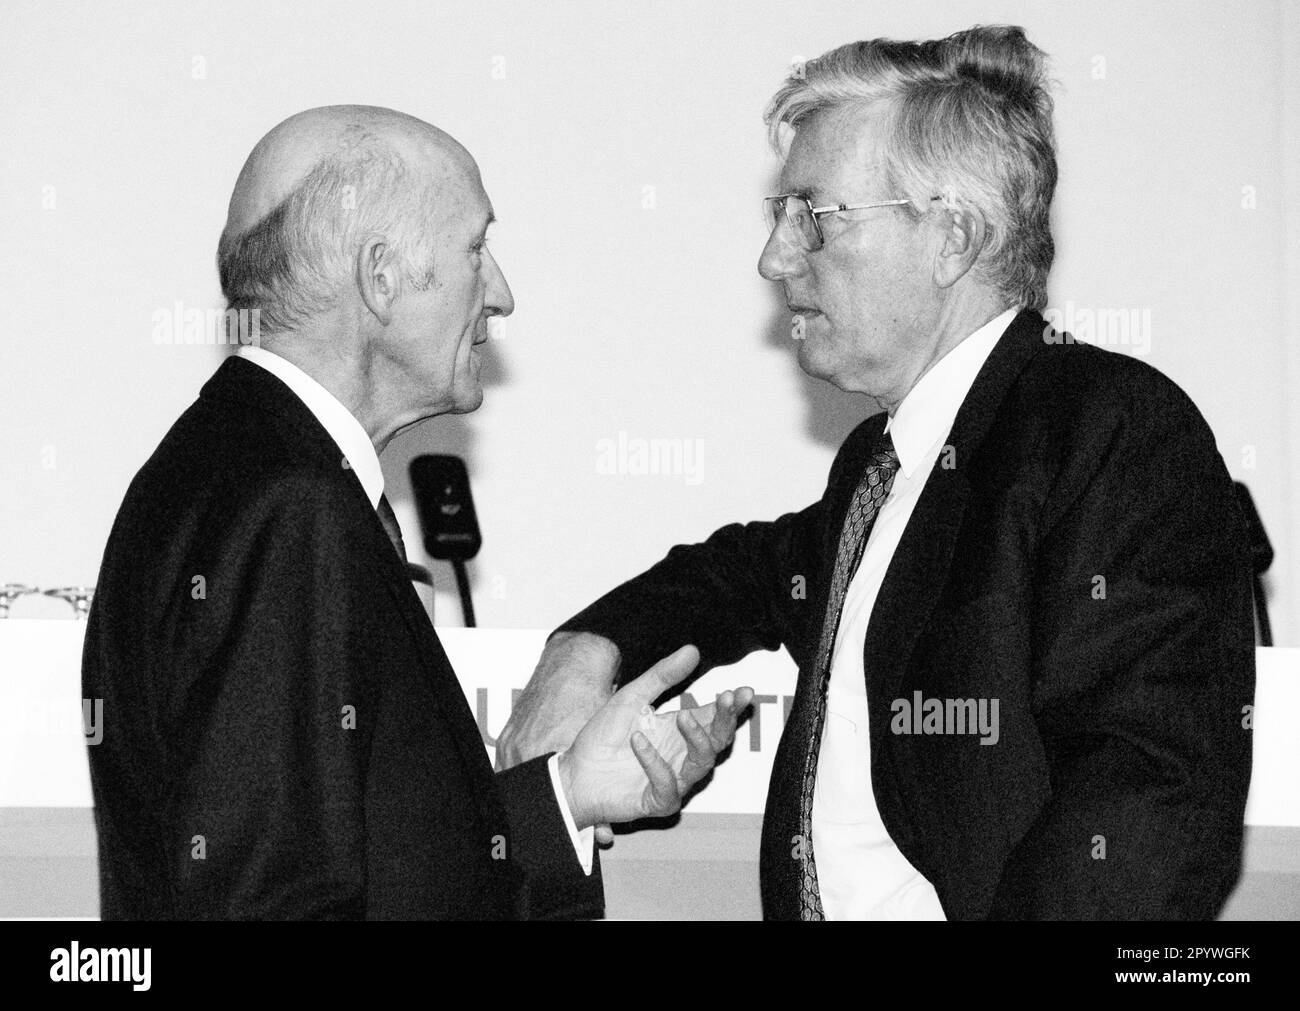 Werner DIETER , Chairman of the Executive Board of Mannesmann AG , and Klaus LIESEN , Chairman of the Executive Board of Ruhrgas AG , October 1991 [automated translation] Stock Photo